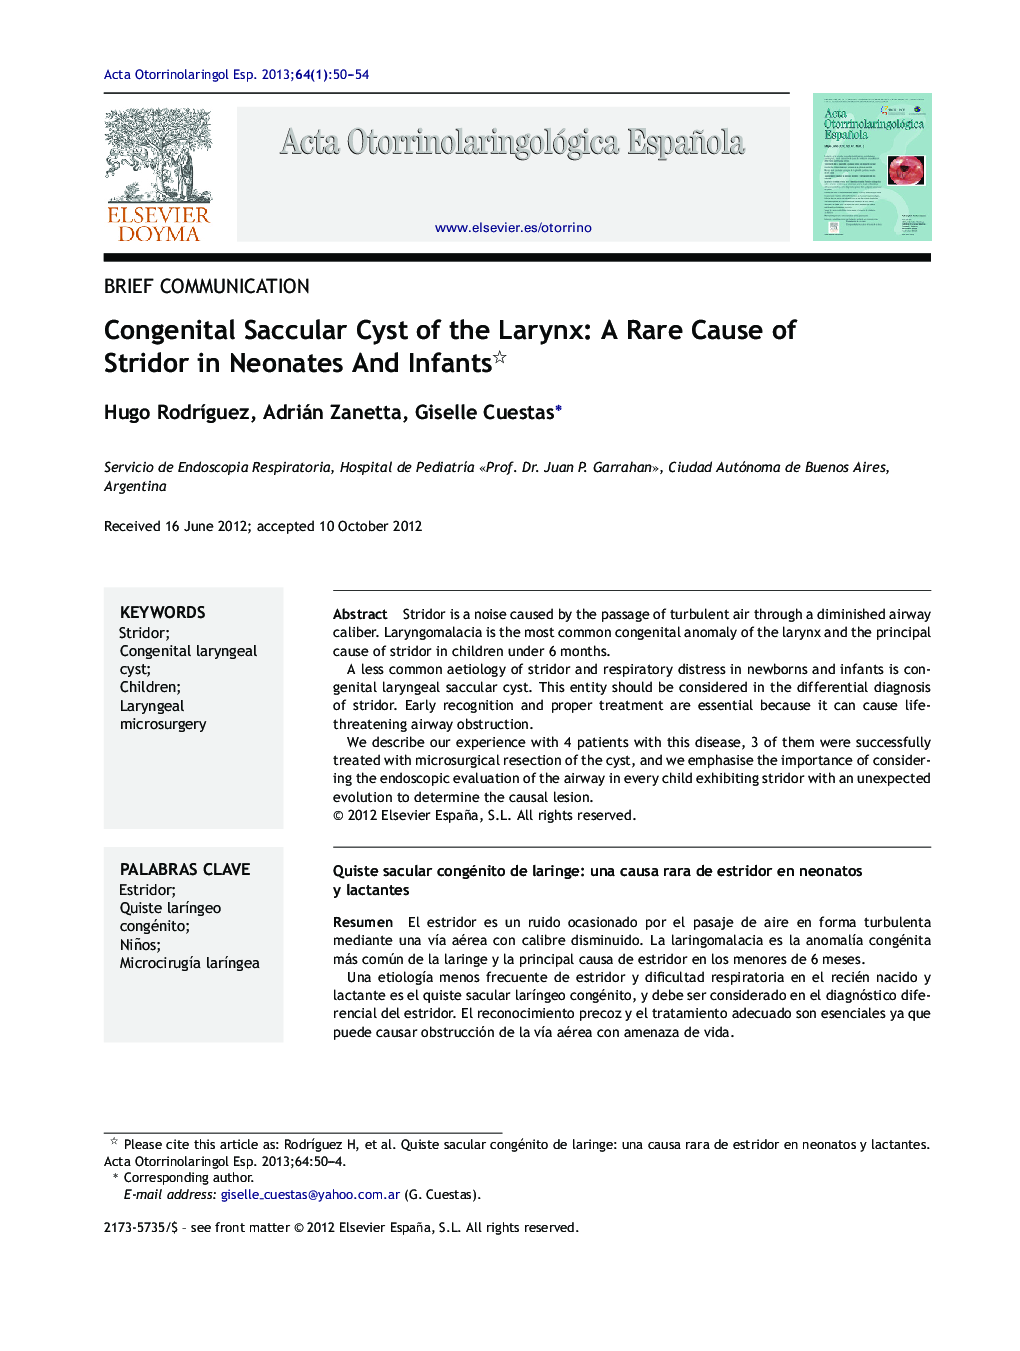 Congenital Saccular Cyst of the Larynx: A Rare Cause of Stridor in Neonates And Infants 